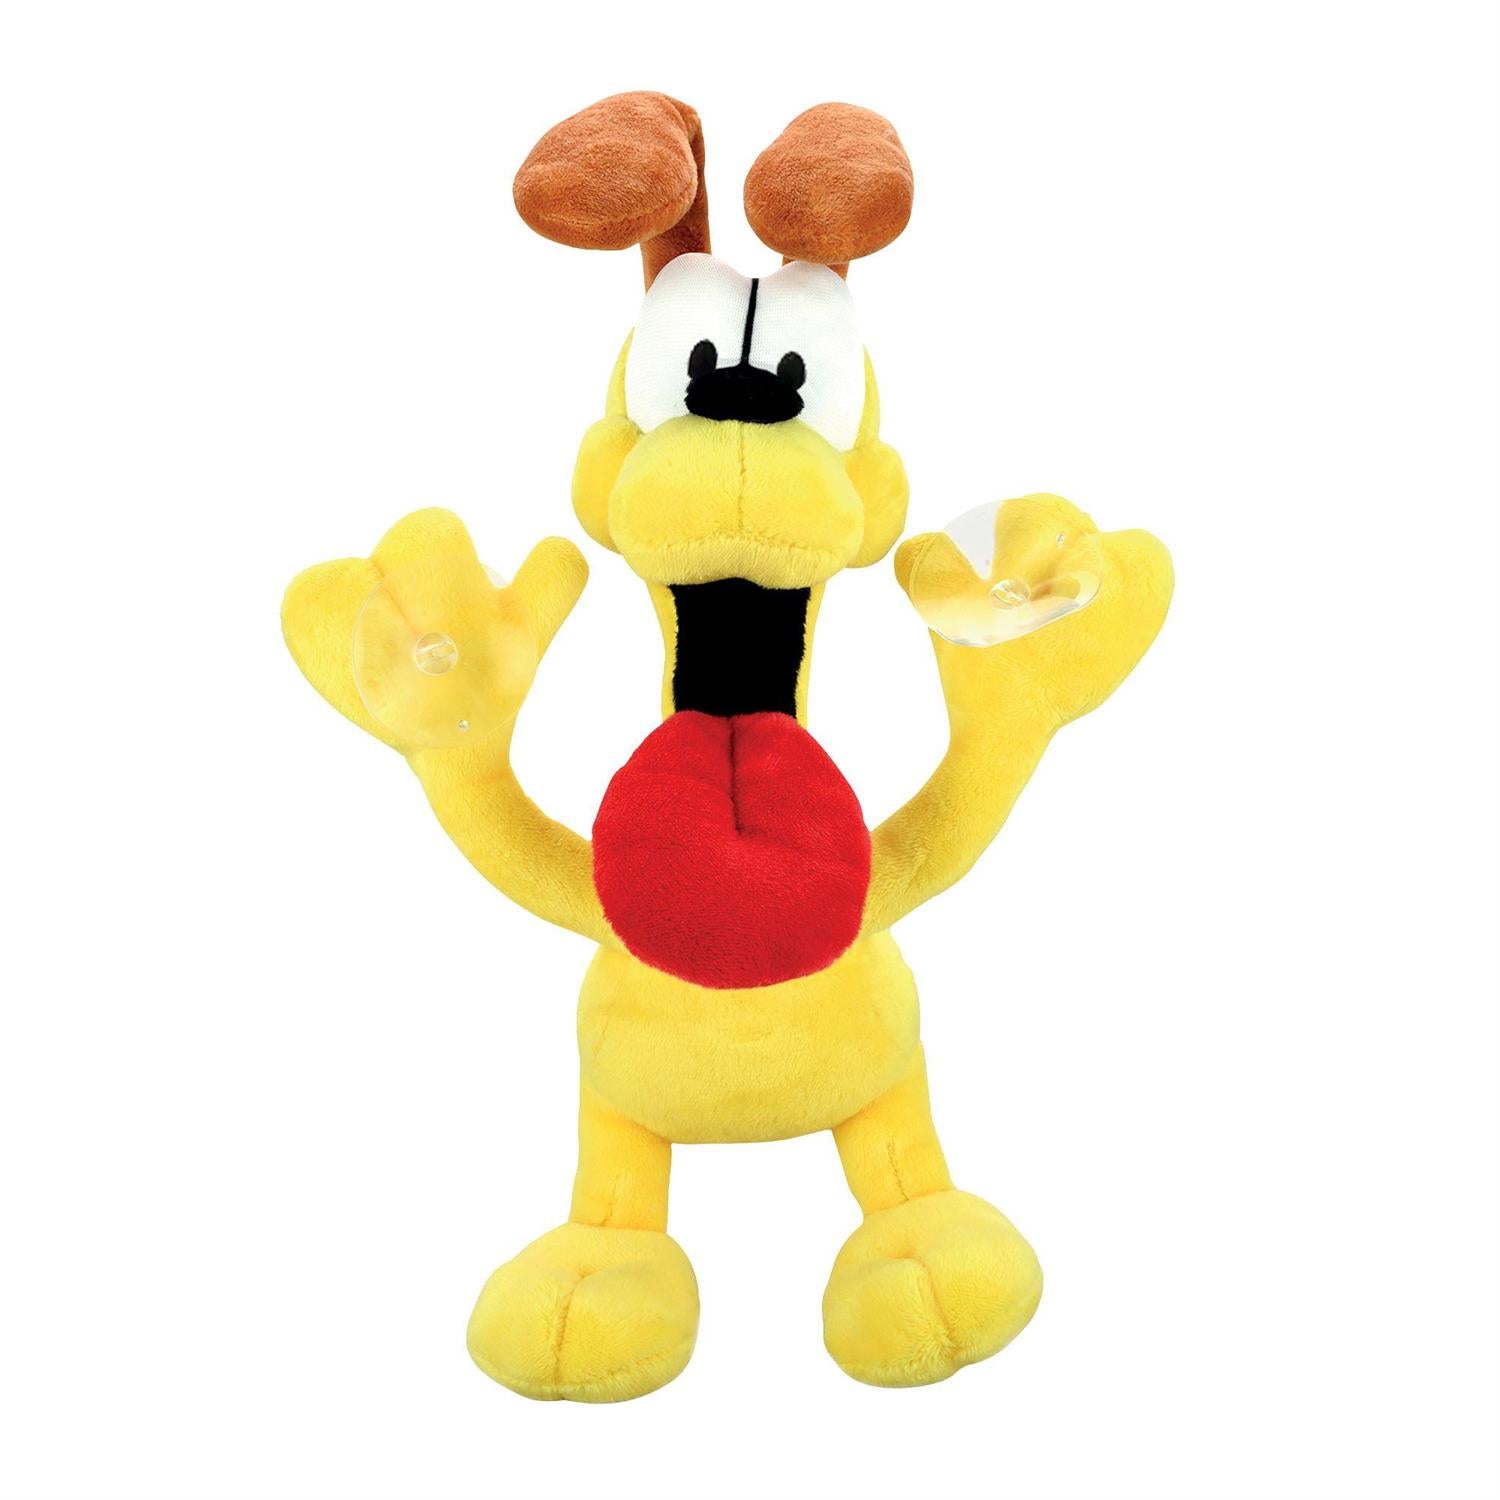 Odie Plush Window Clinger, 8.27 inches Tall, with Suction Cups